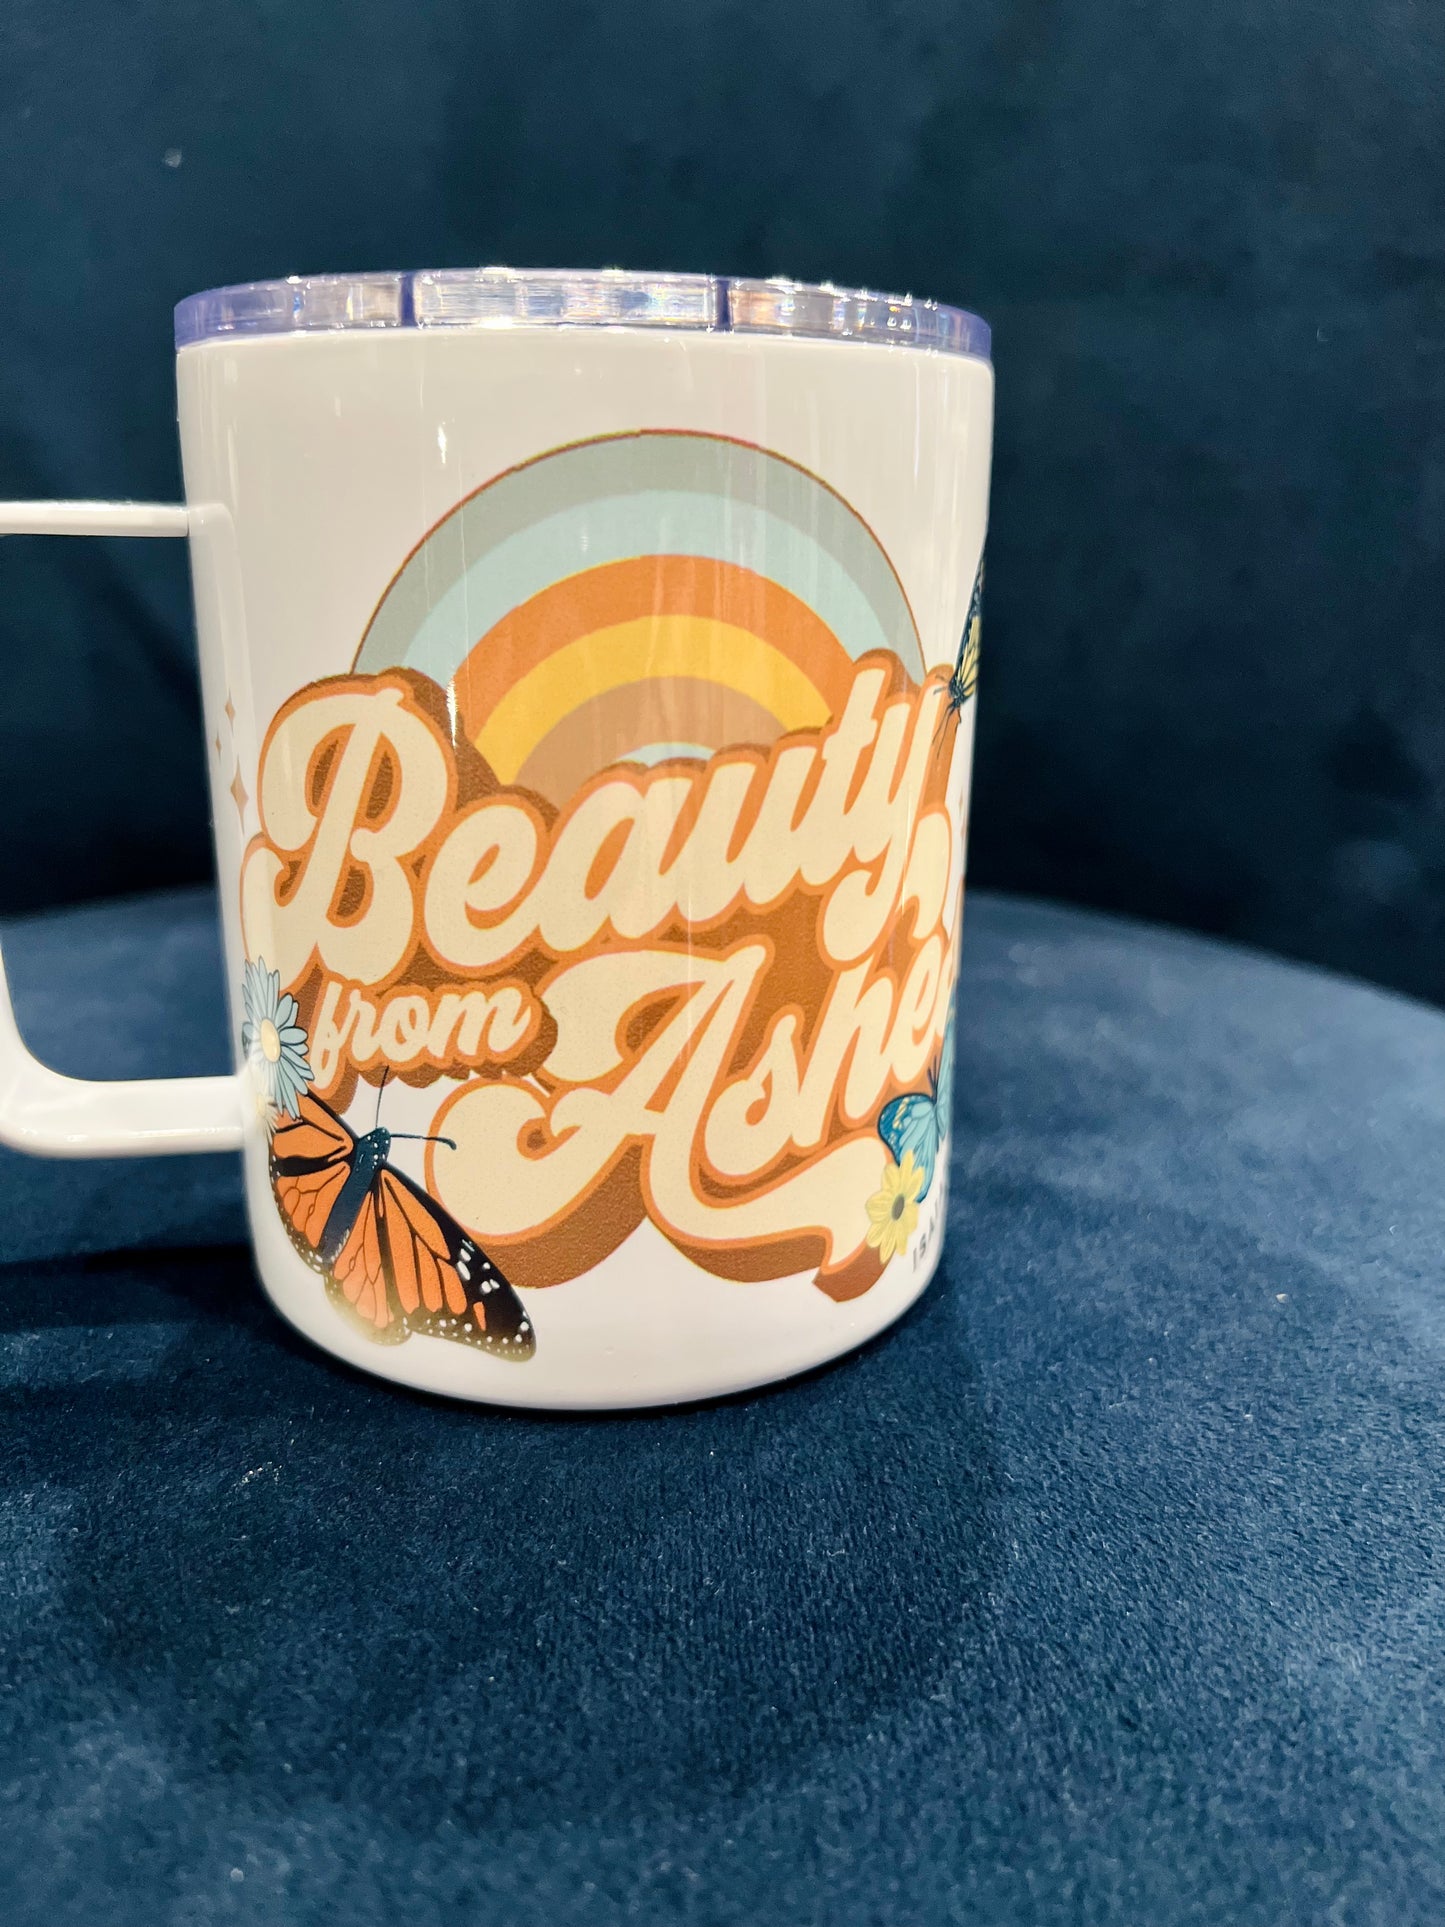 Beauty from Ashes 12 oz Travel Mugs